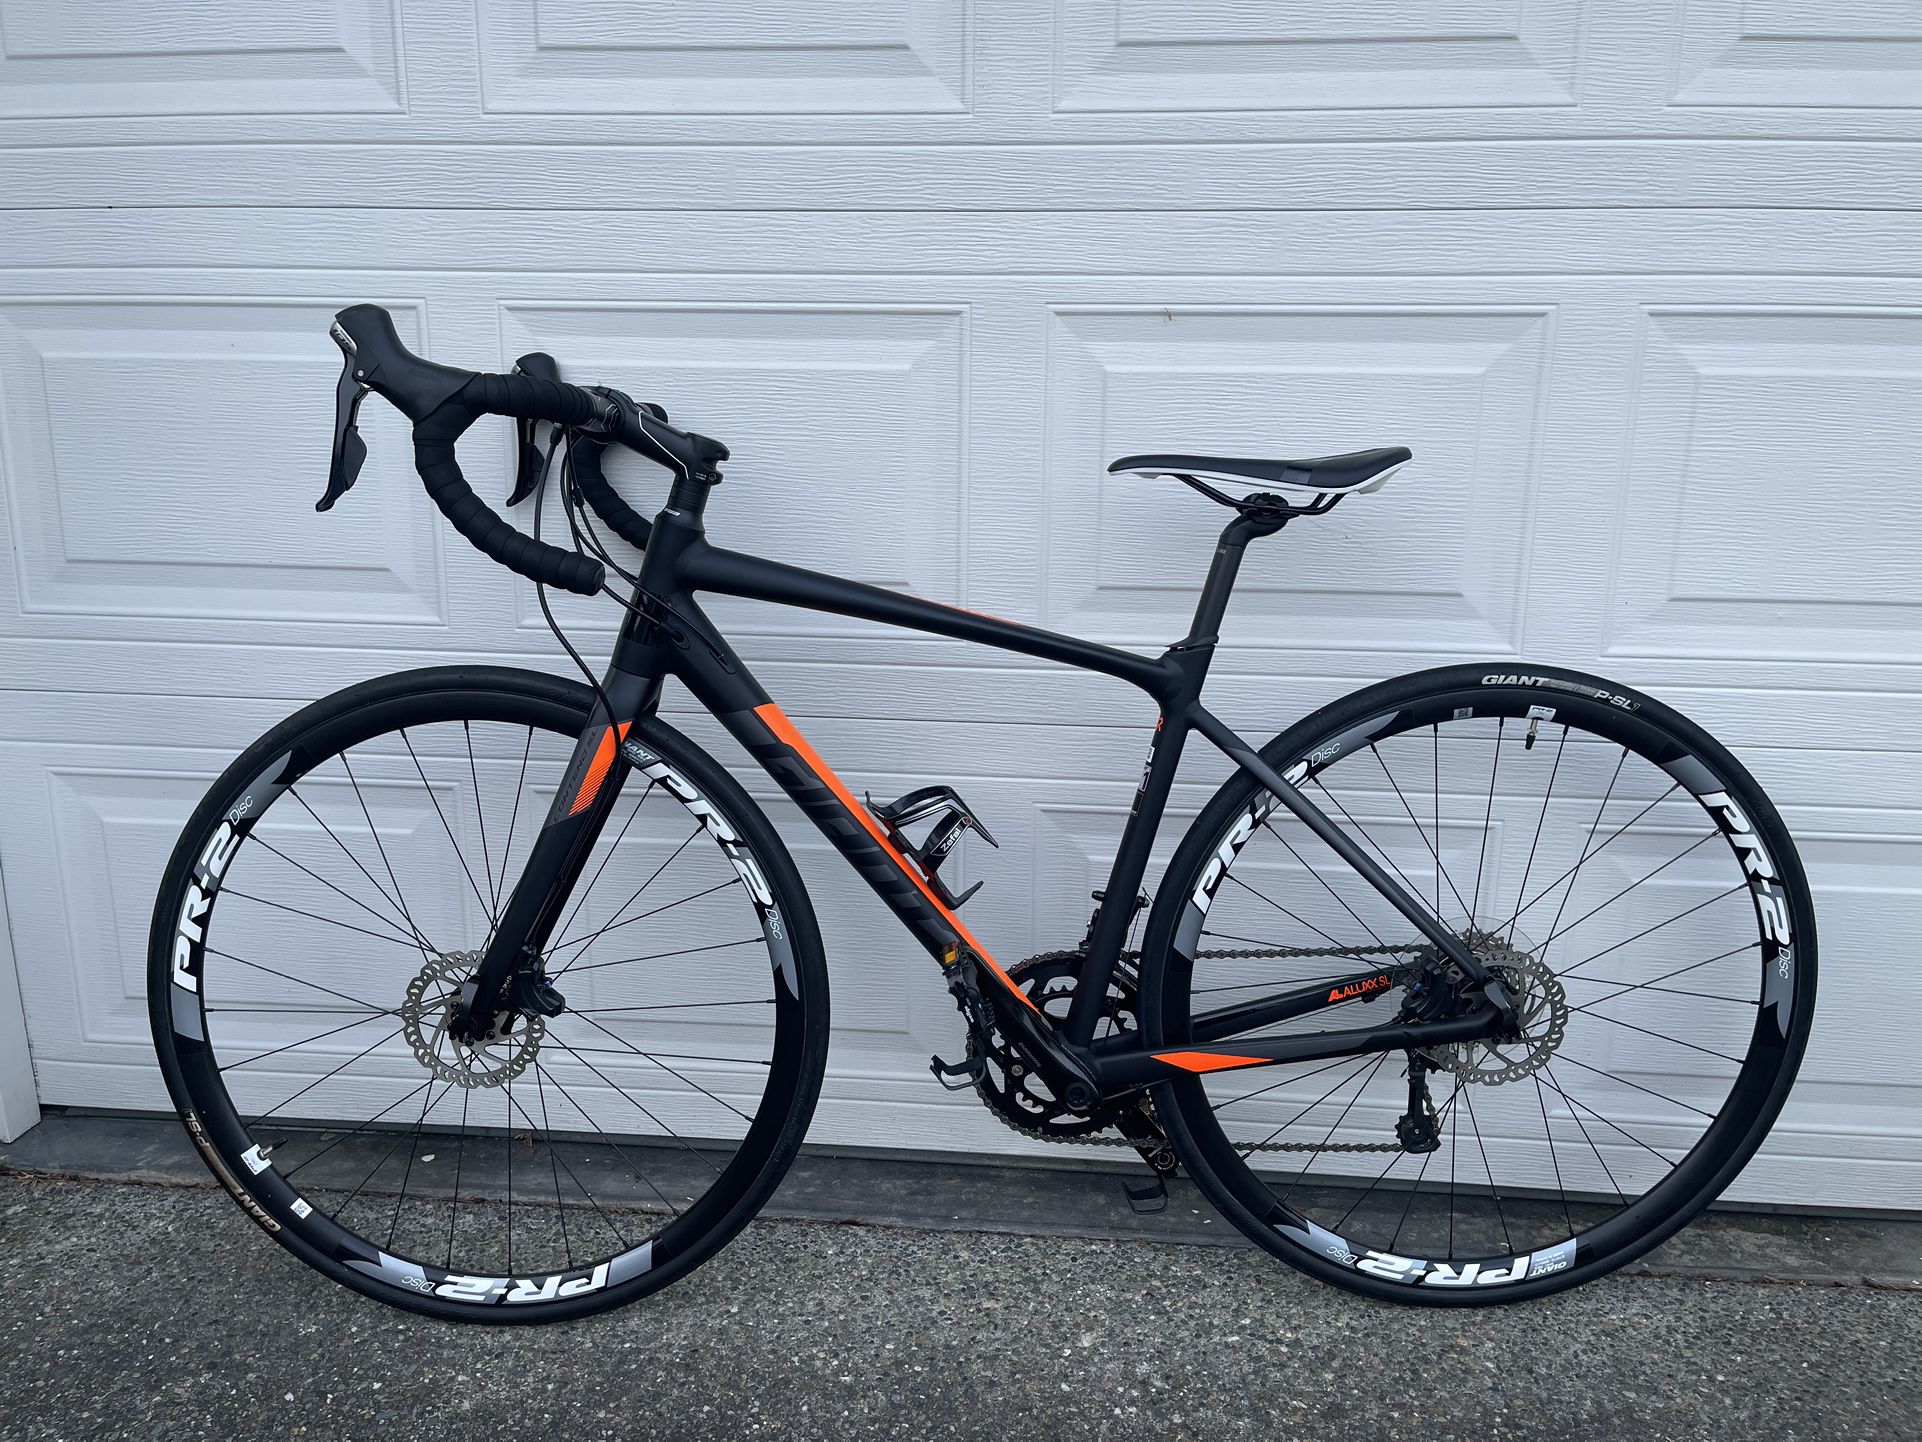 2017 Giant Contend SL1 Disc Brake for Sale in Renton, WA - OfferUp